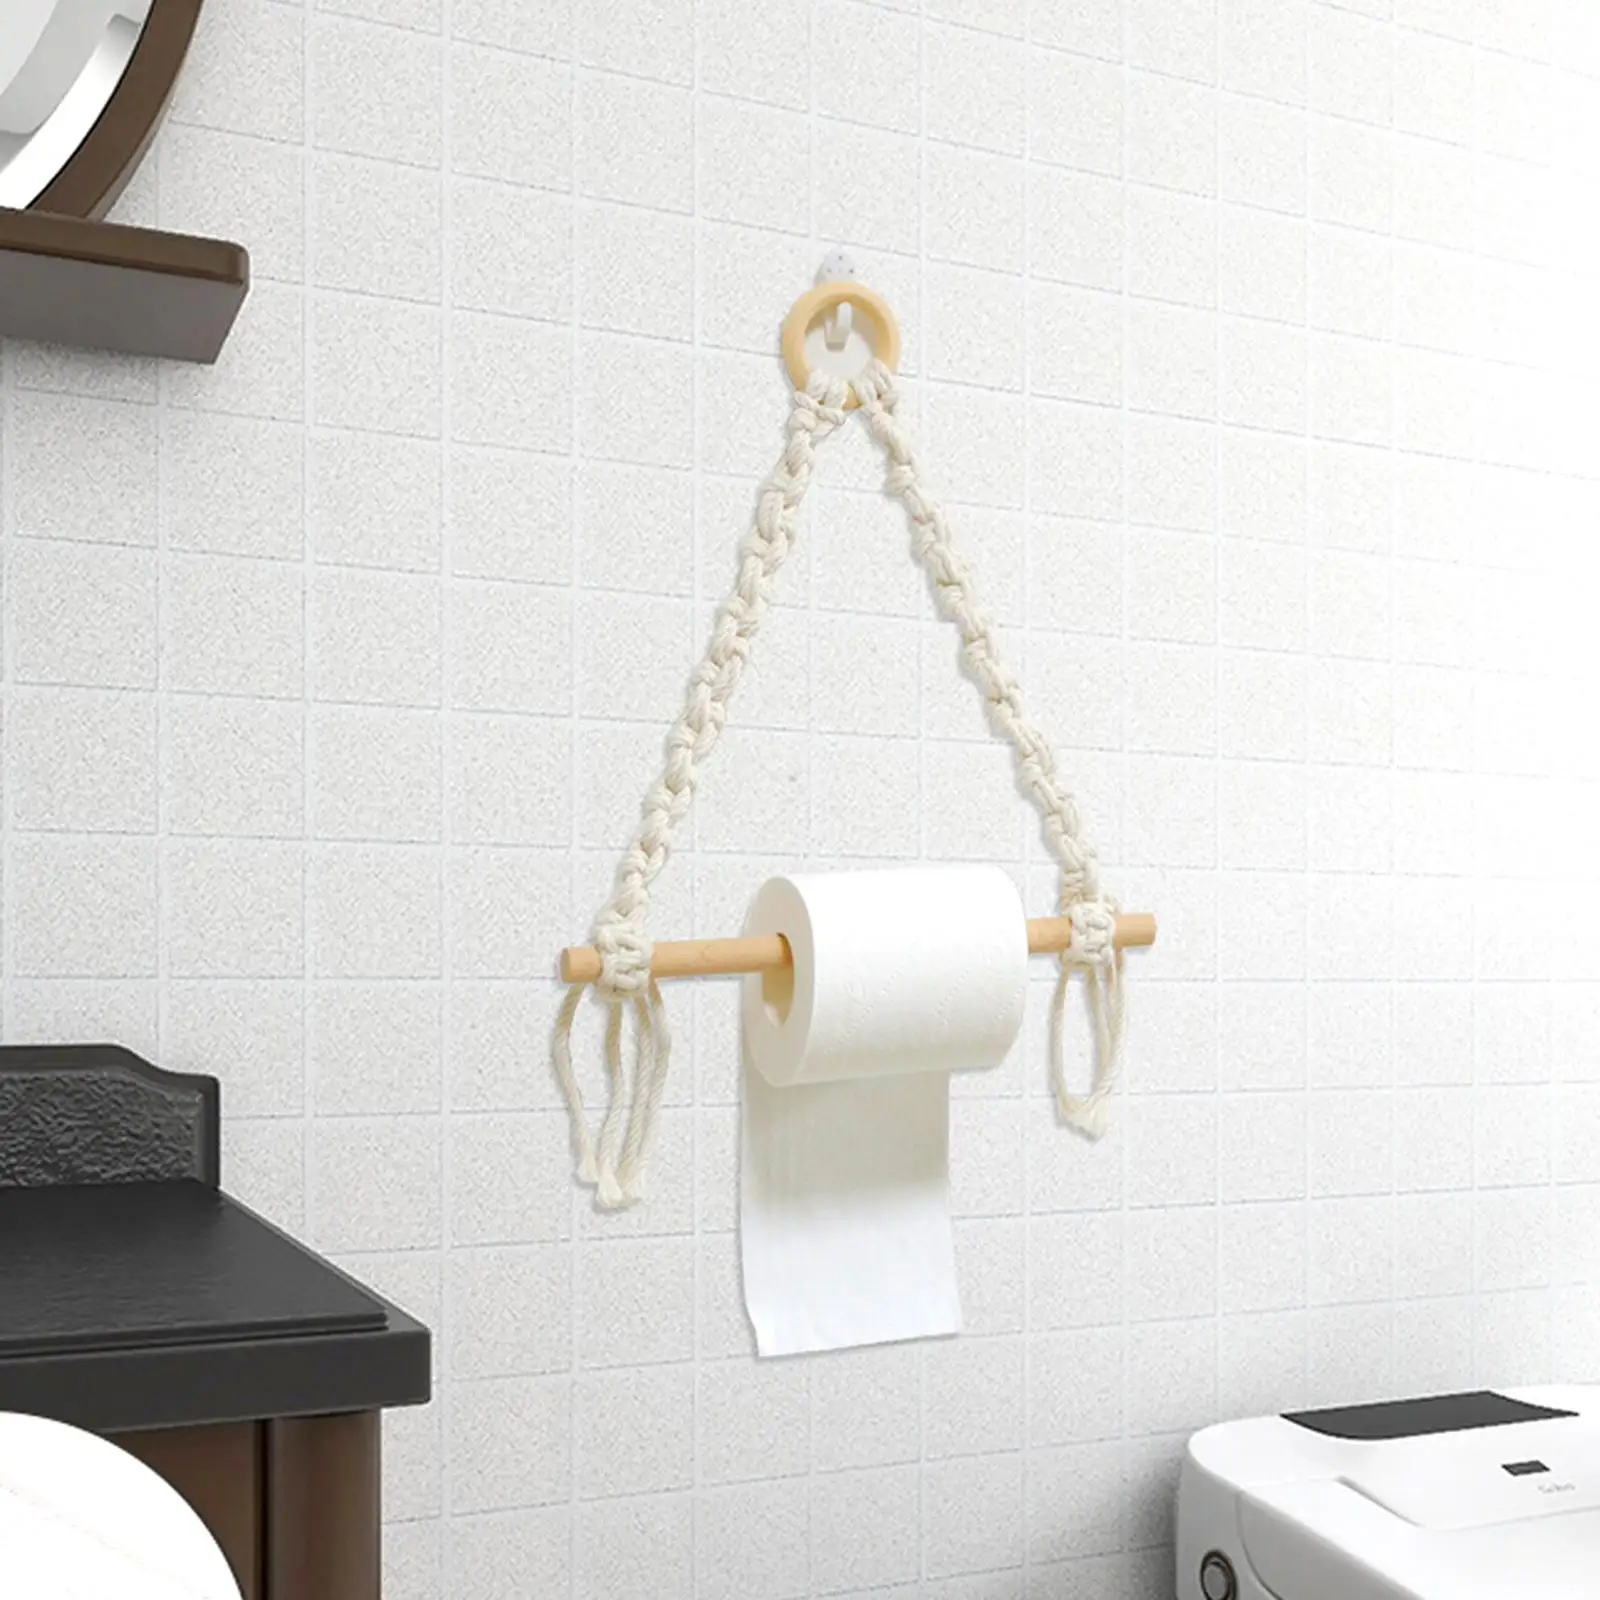 Wood and Rope Toilet Roll Holder Decorative Wall Tapestry Towel Hanging Bar Rope Wall Mount for Laundry Room Kitchen Hotel Home